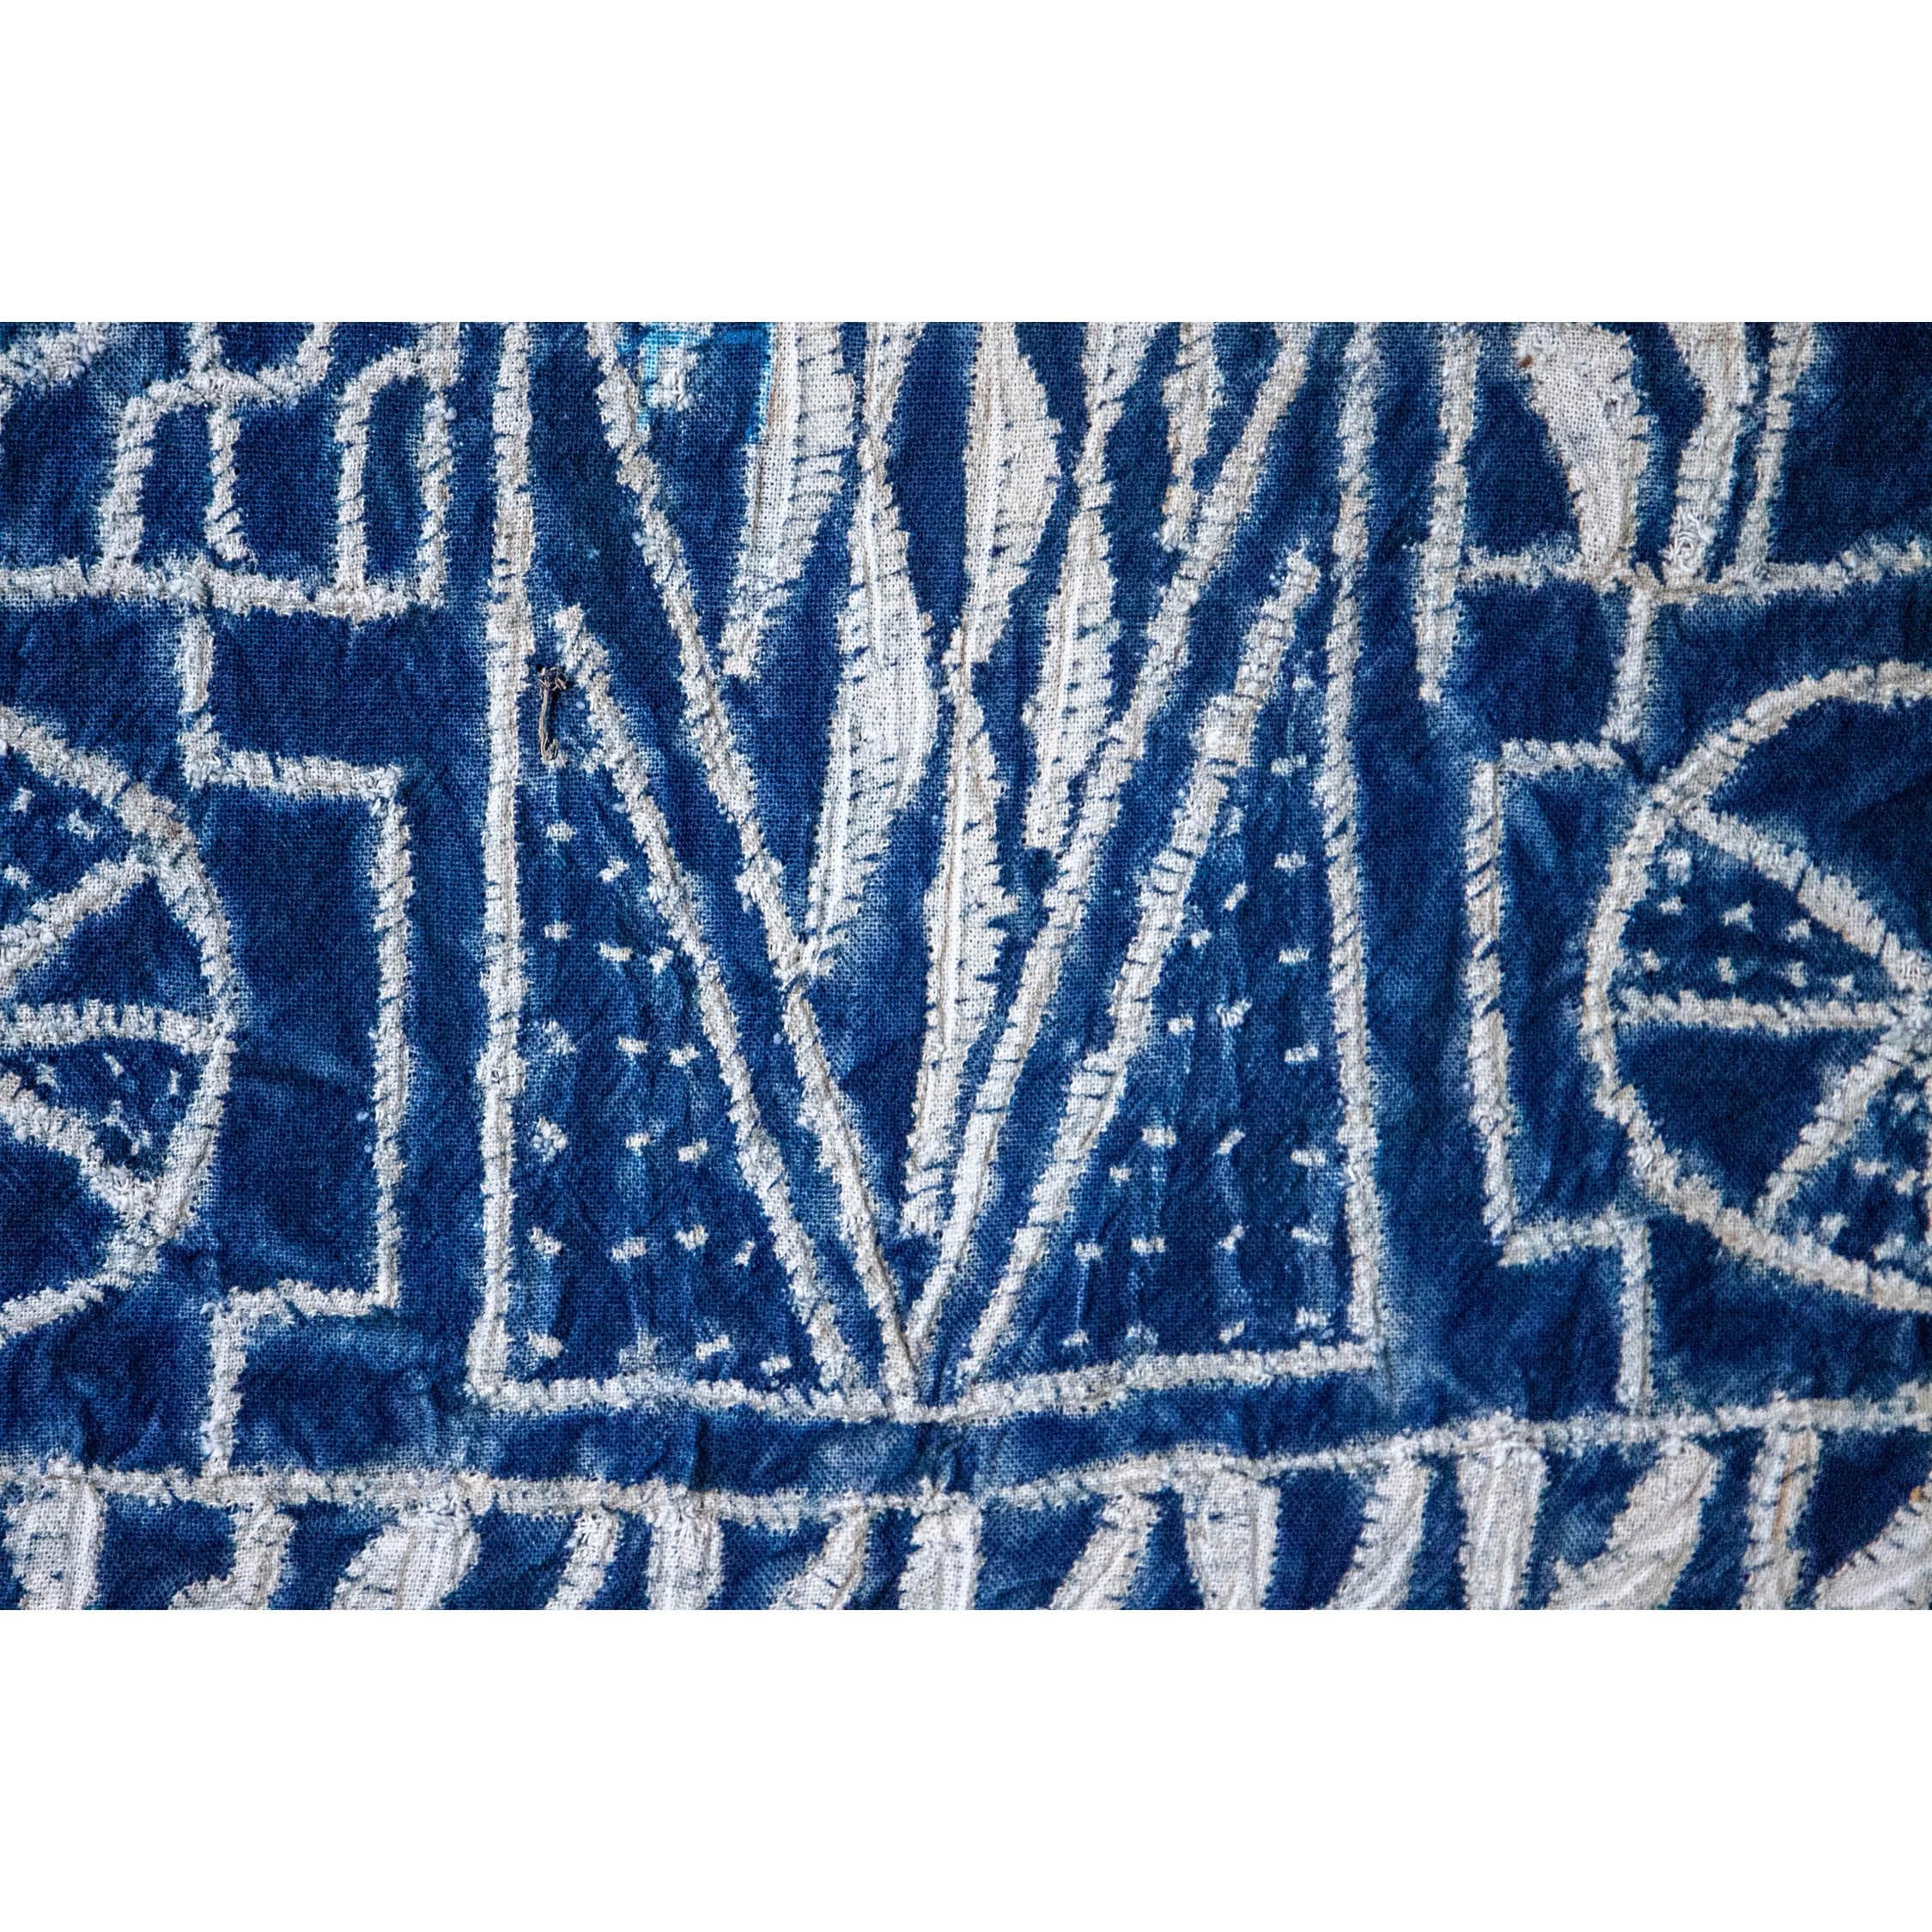 Large Vintage ‘Ndop’ Indigo Cloth or Textile Mid 20th C or Earlier   In Good Condition For Sale In AMSTERDAM, NH